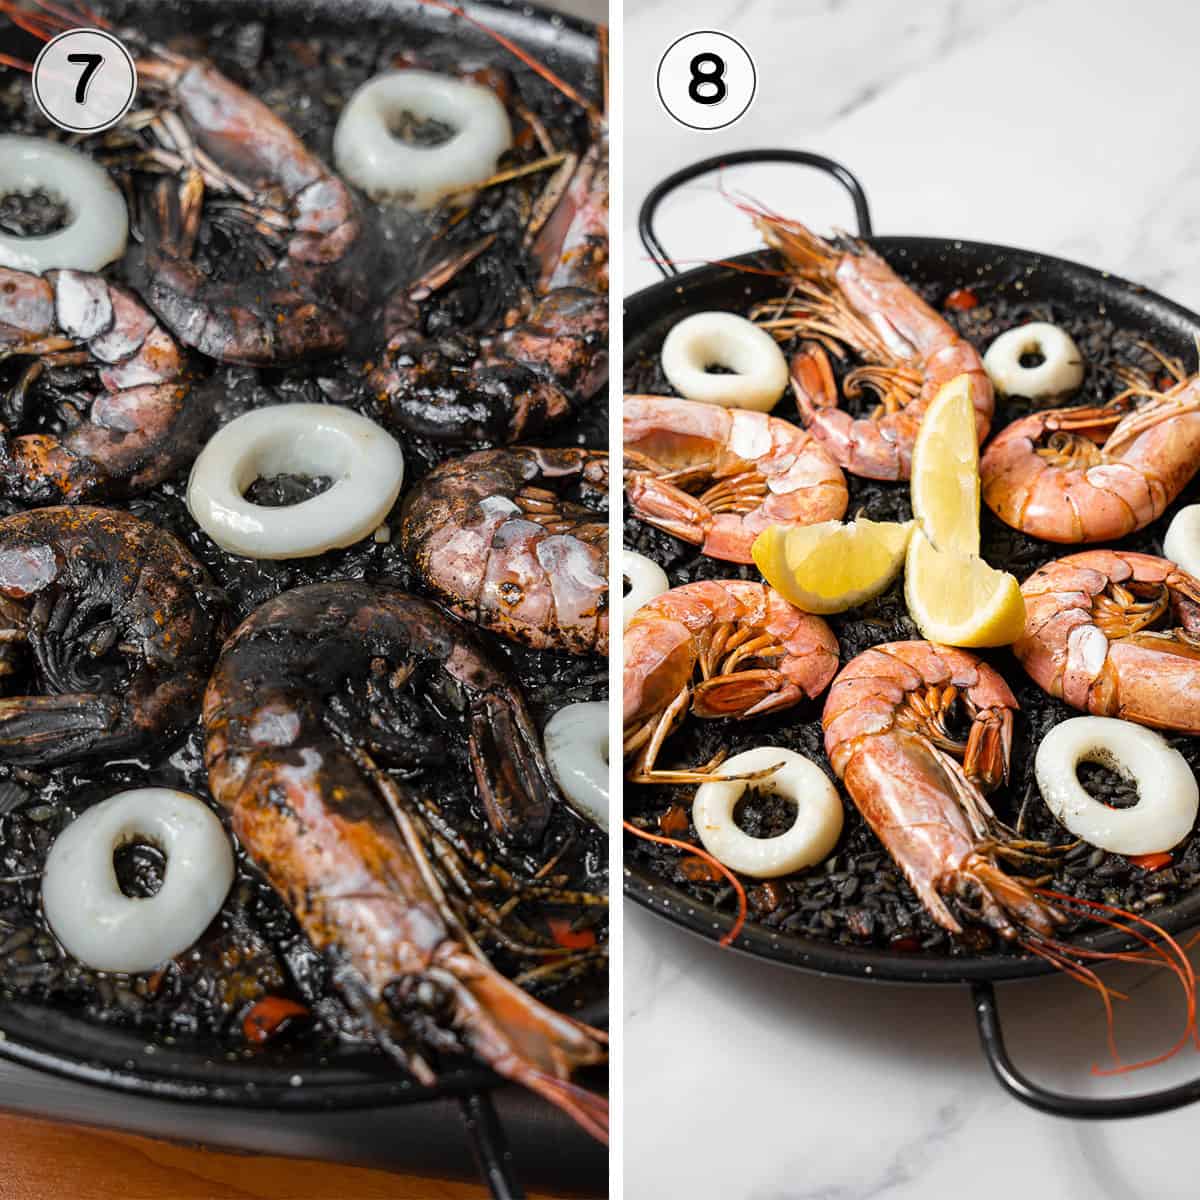 cooking the prawns and serving the paella.